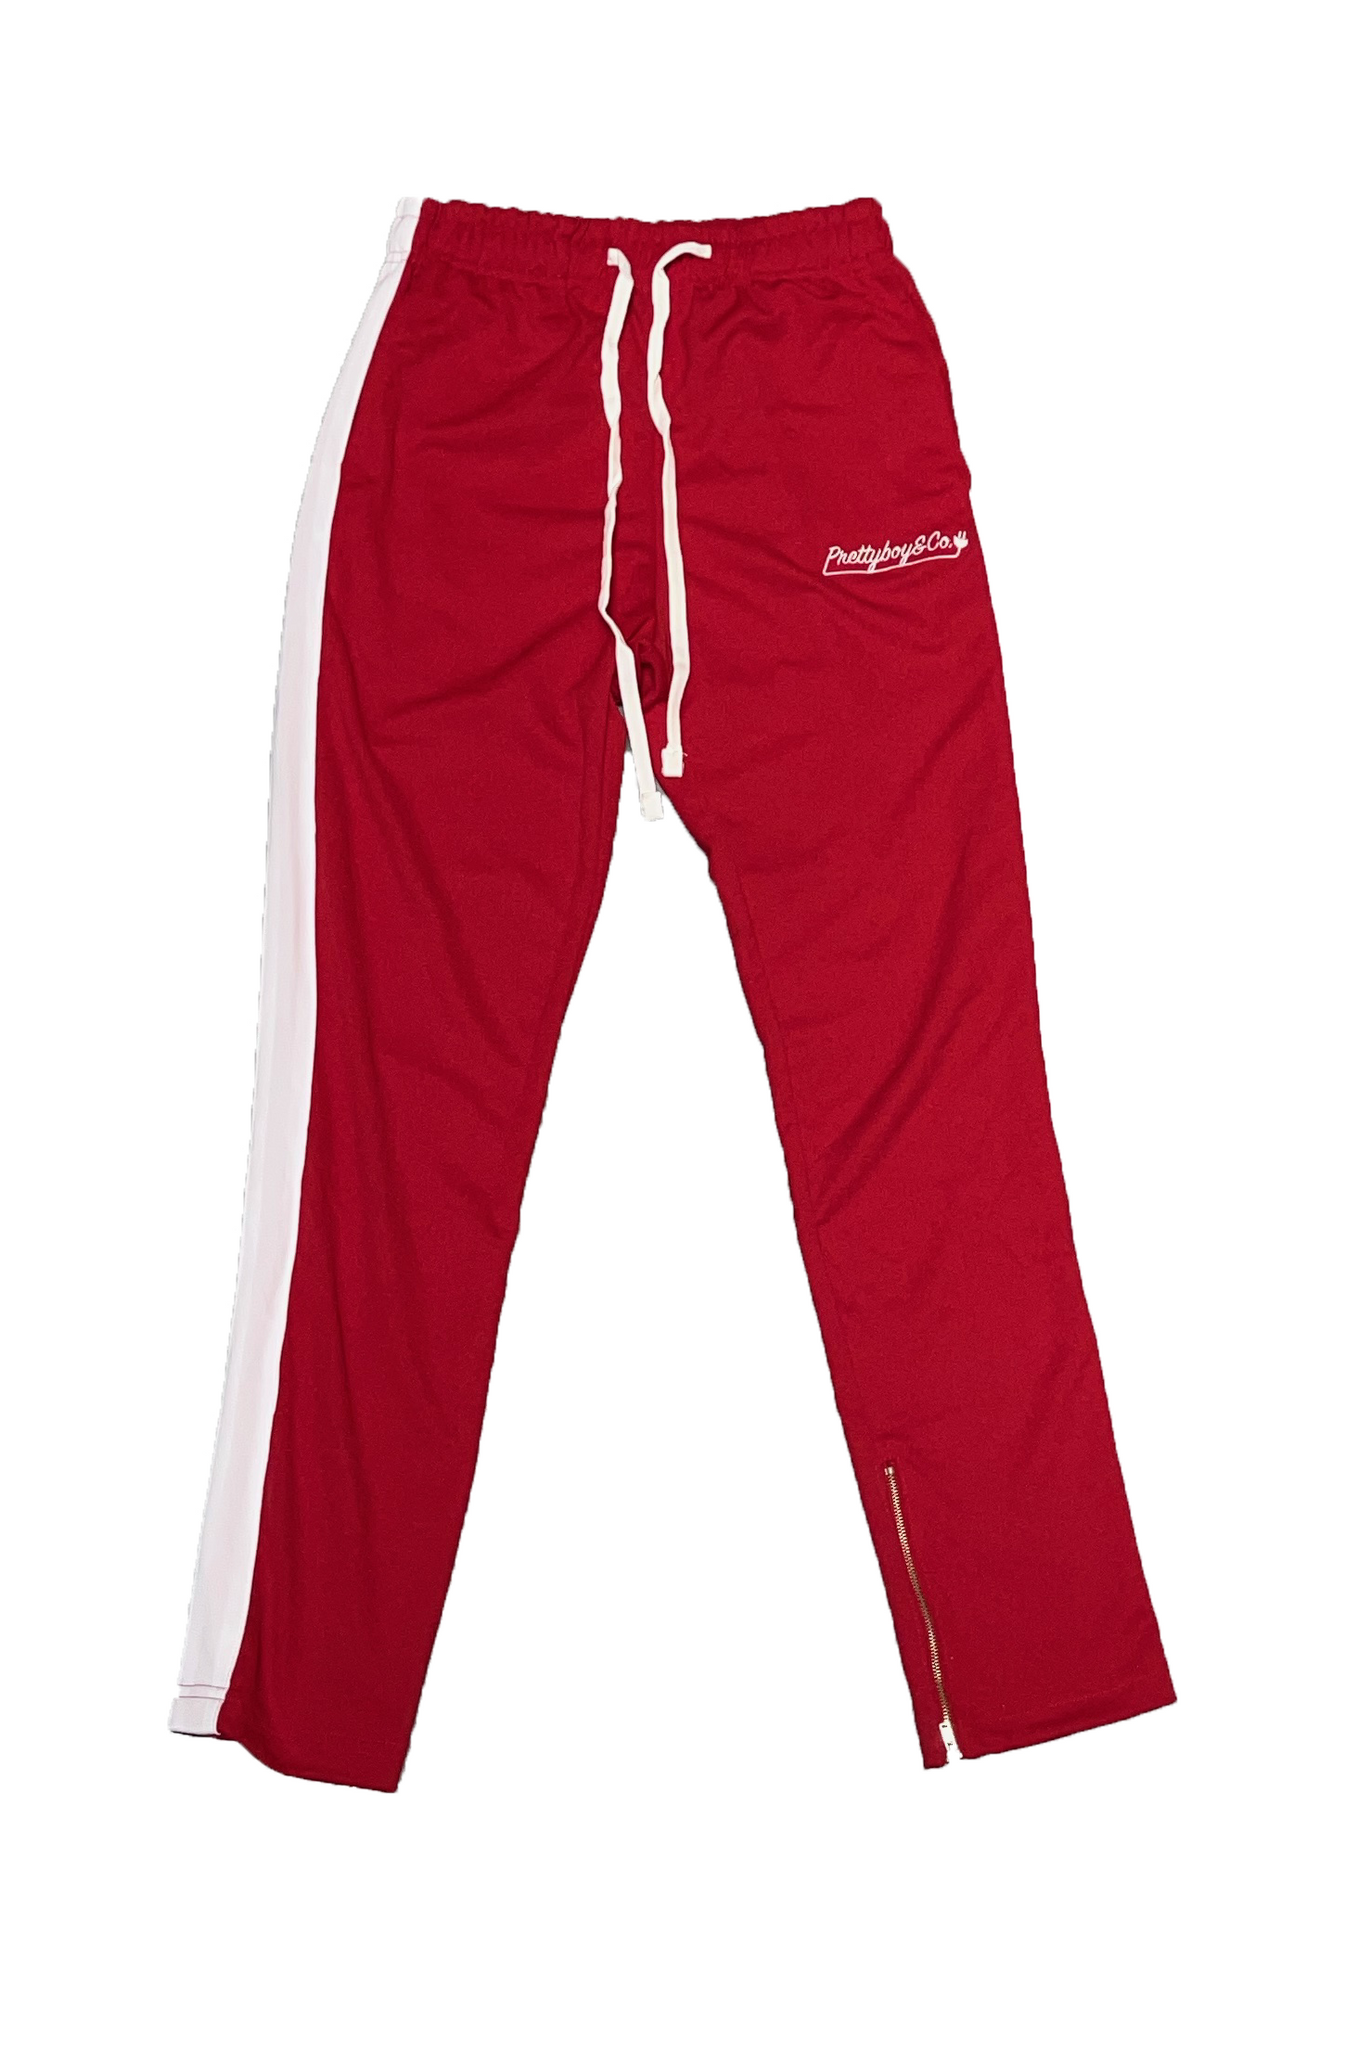 Red/White Embroidered Track Pants